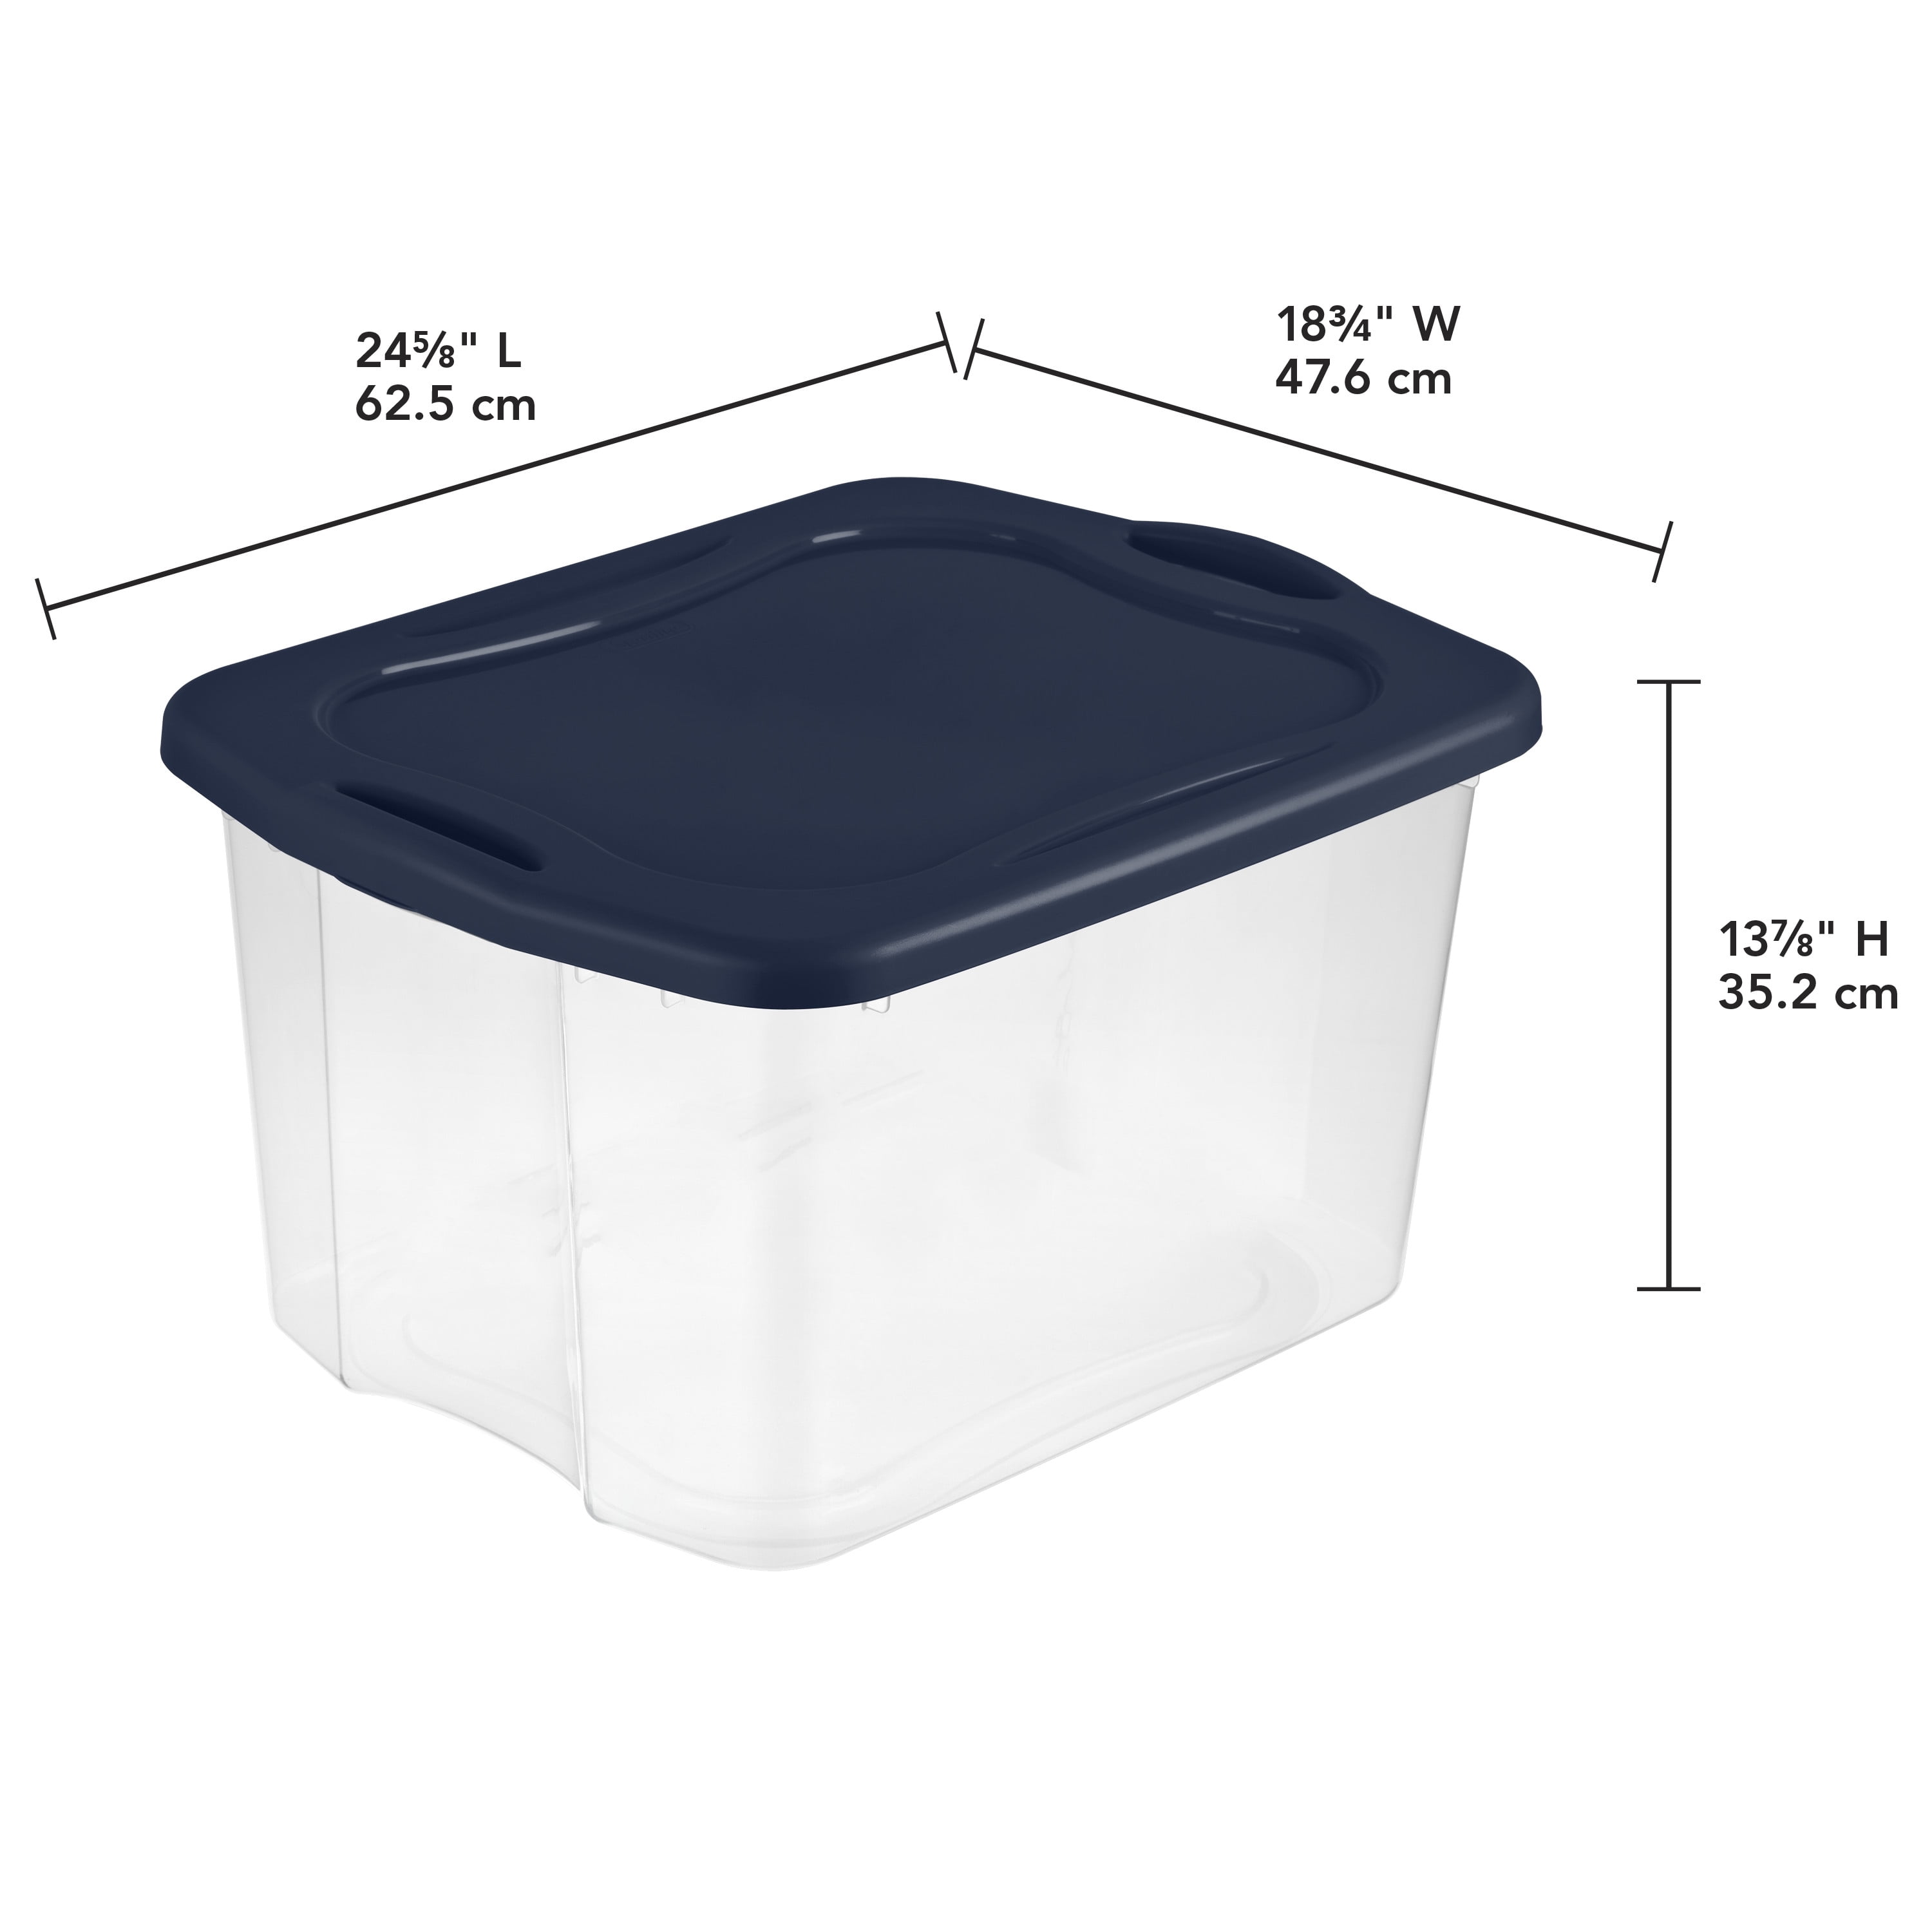 Sterilite Small Clear Divided Storage Container Box Supplies Plastic Craft  4 Pk.